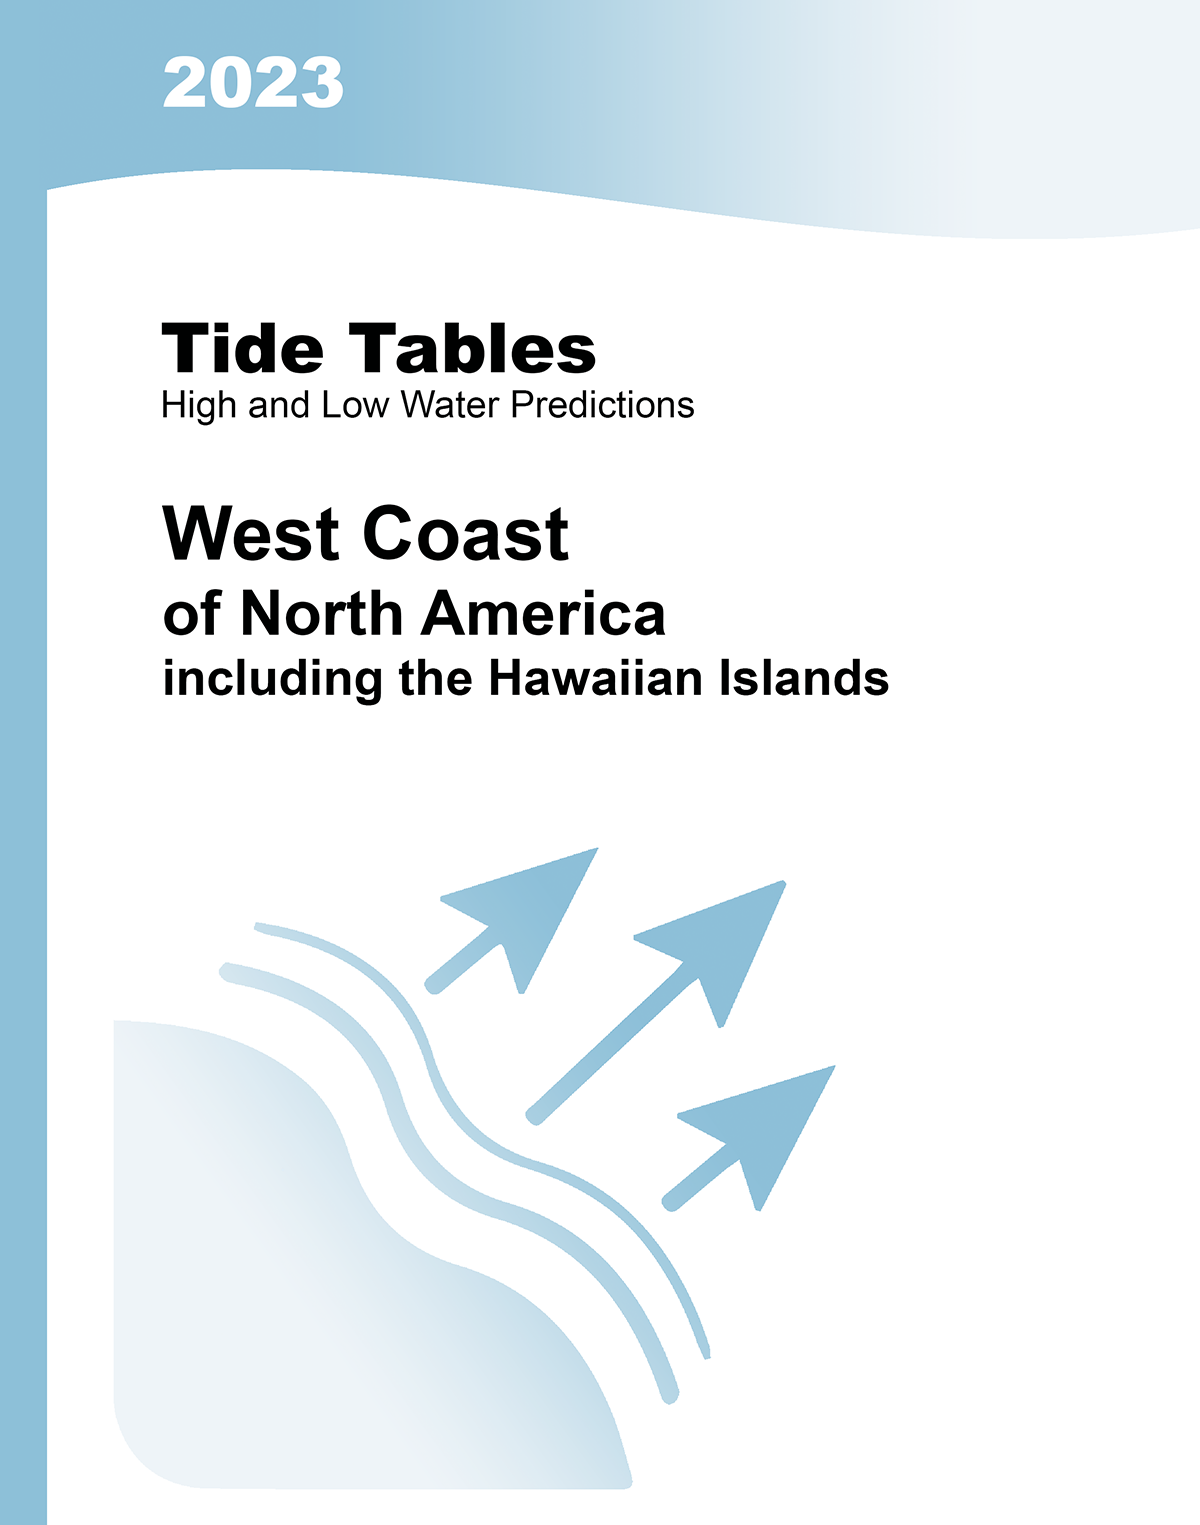 Tide and Tidal Current Tables, Tide Tables 2023: West Coast of North America incl. Hawaiian Islands - U.S. Waters